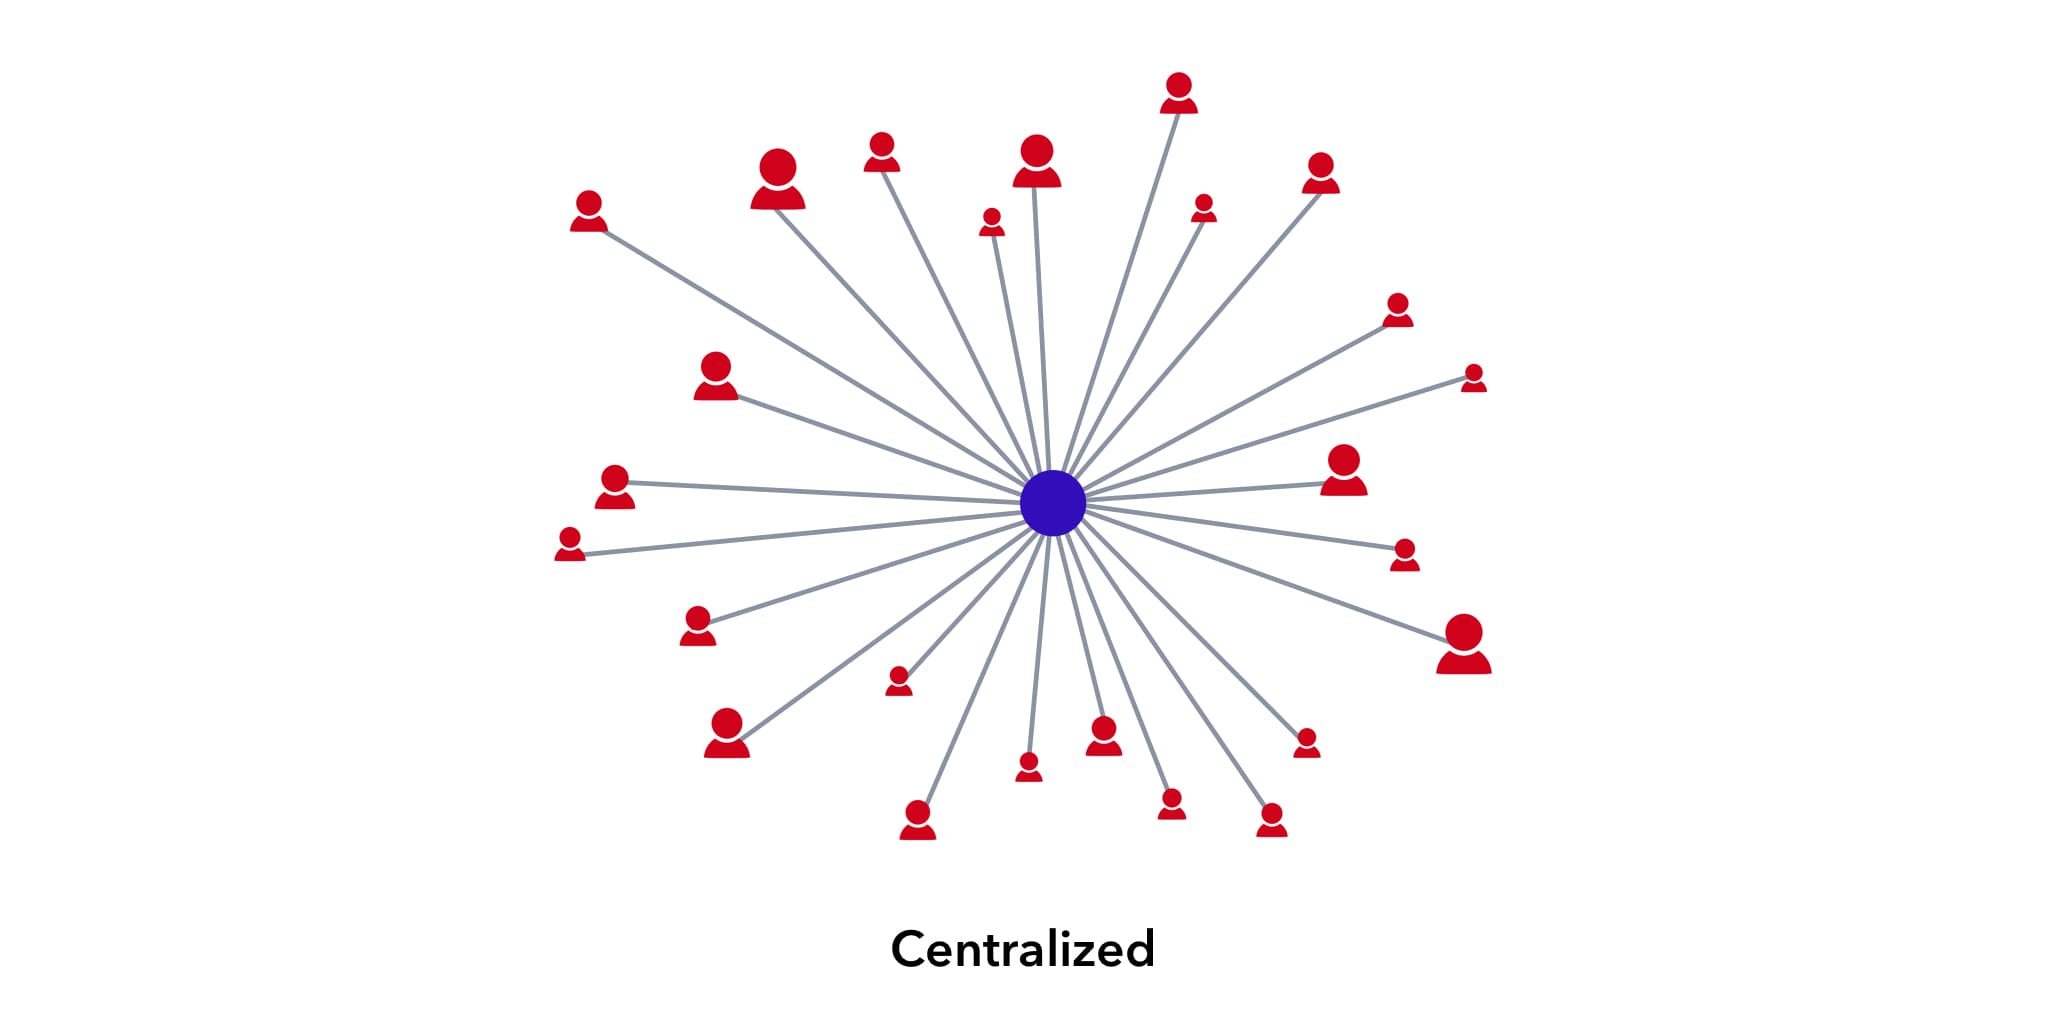 Centralized structure